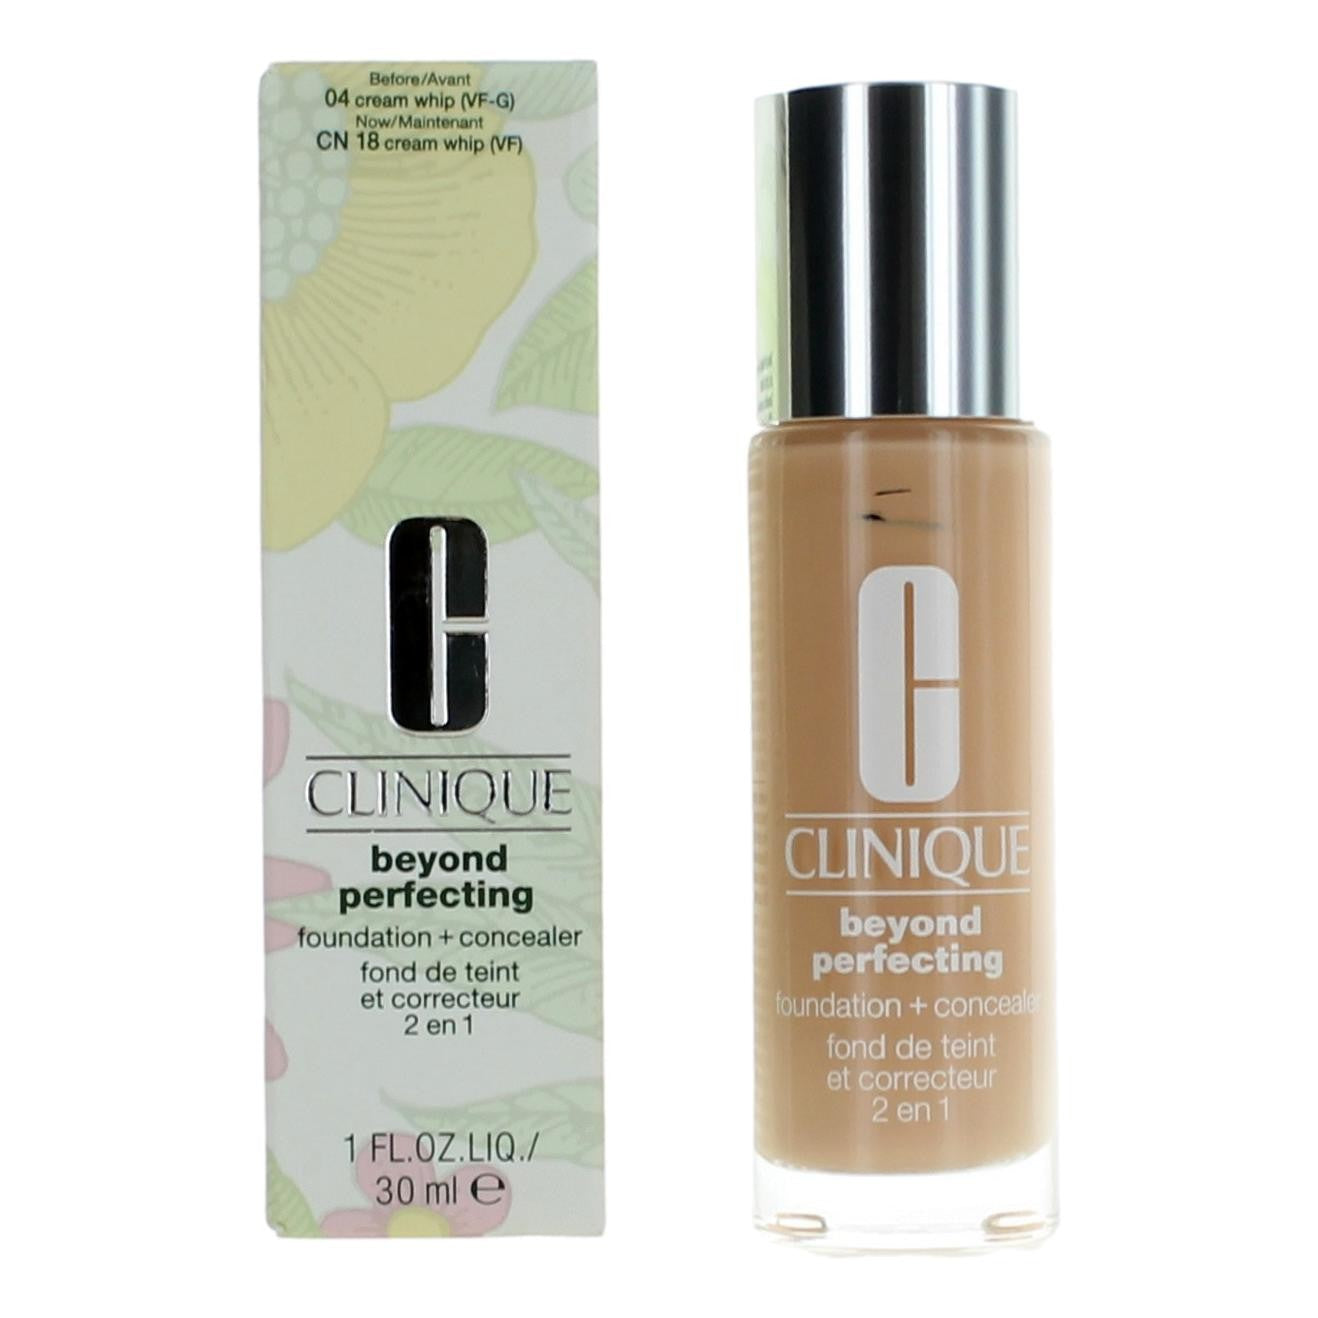 Clinique Beyond Perfecting, 1oz Foundation + Concealer - CN 18 Cream Whip - CN 18 Cream Whip